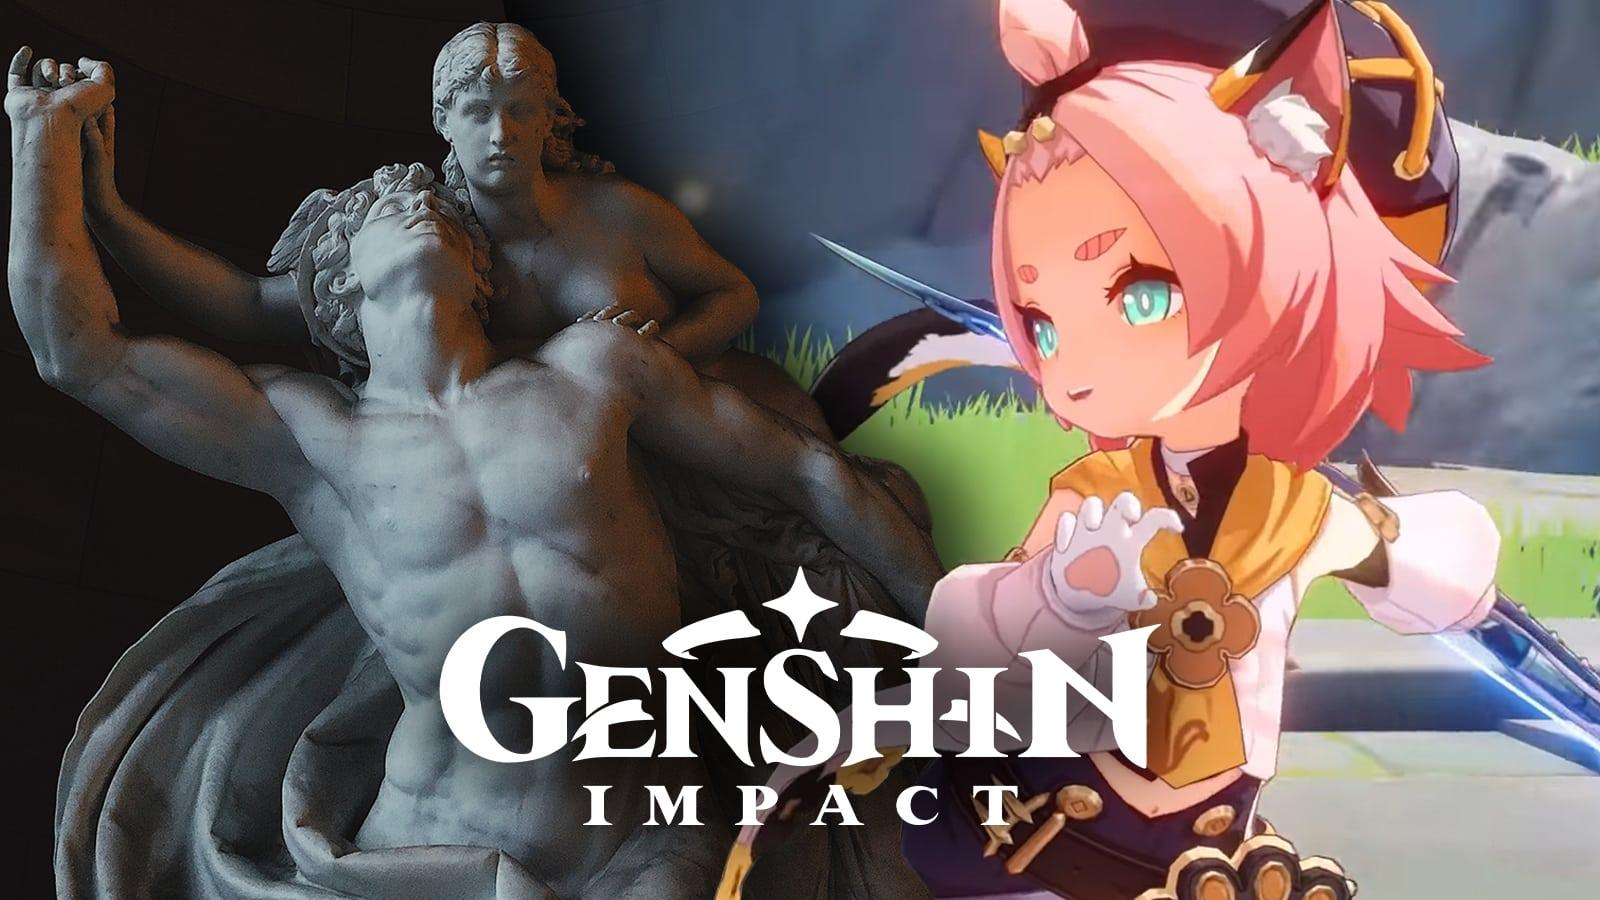 Diona of Genshin Impact has a pretty visible connection to the greek goddess Dionysus